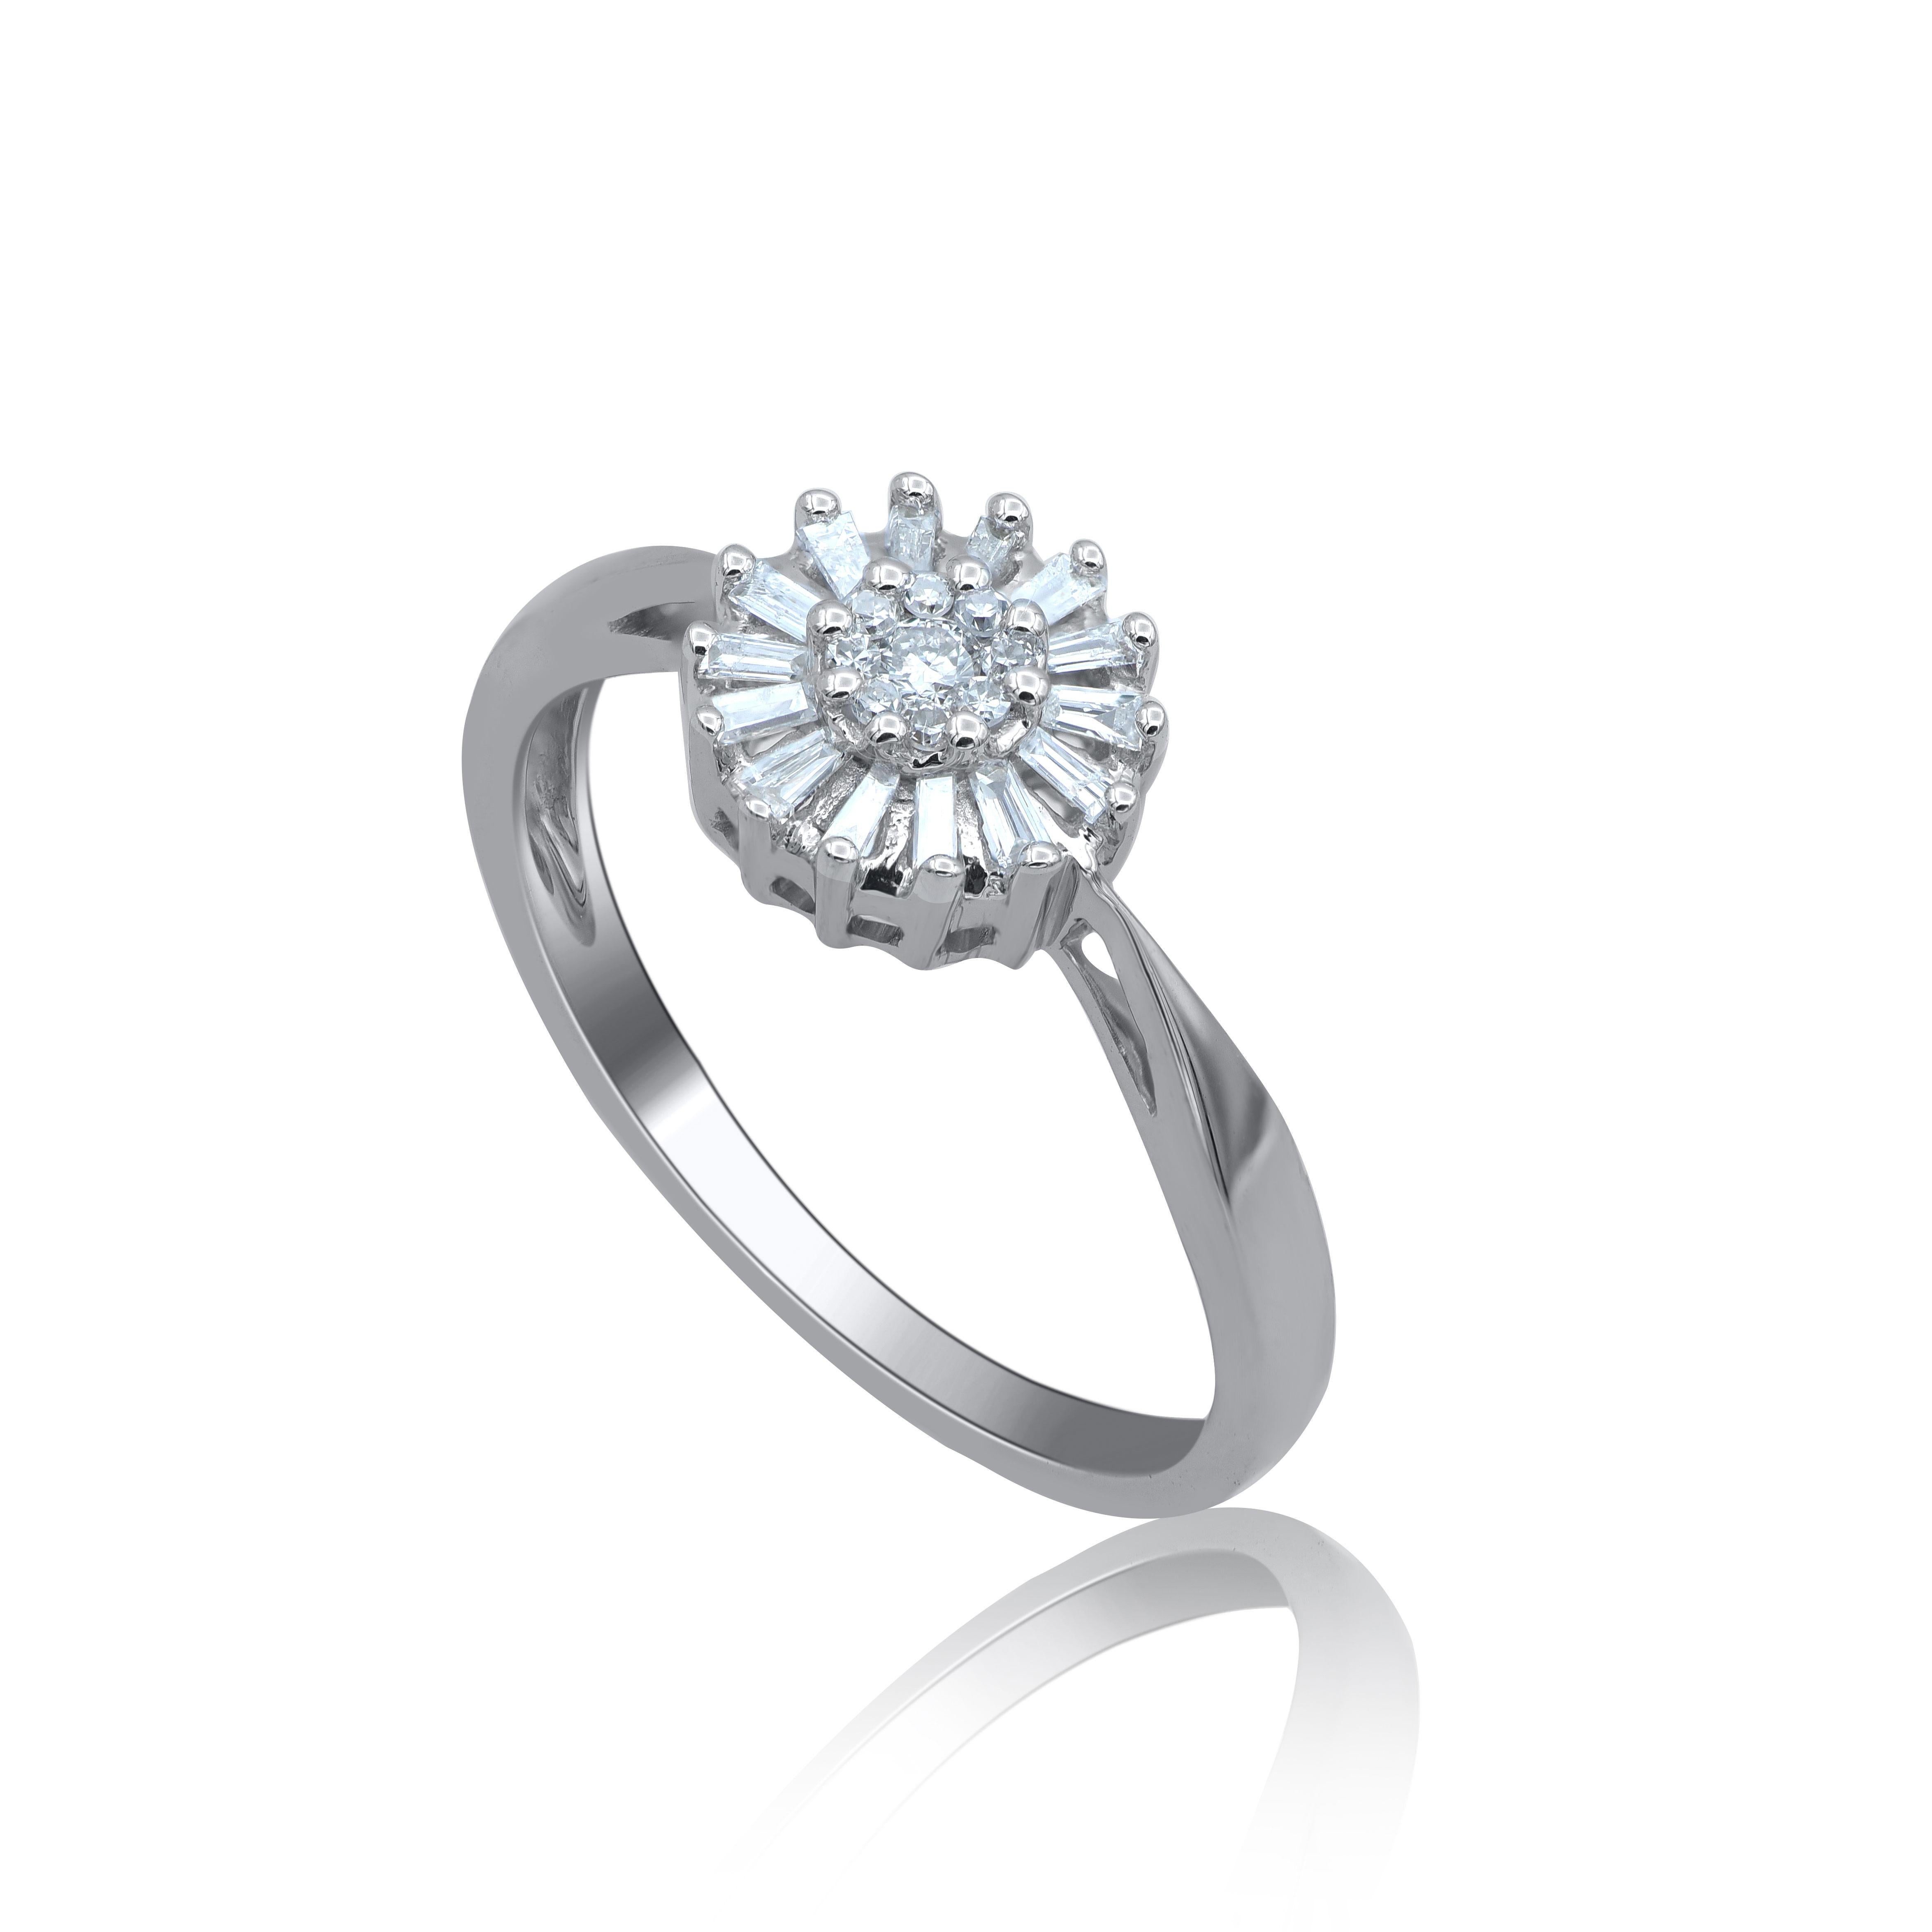 Add a touch of elegance with this diamond engagement ring. This ring is beautifully crafted in 14 karat white gold and set with 23 single cut, brilliant cut and baguette diamonds in pressure & half channel  setting. The total weight of diamonds is